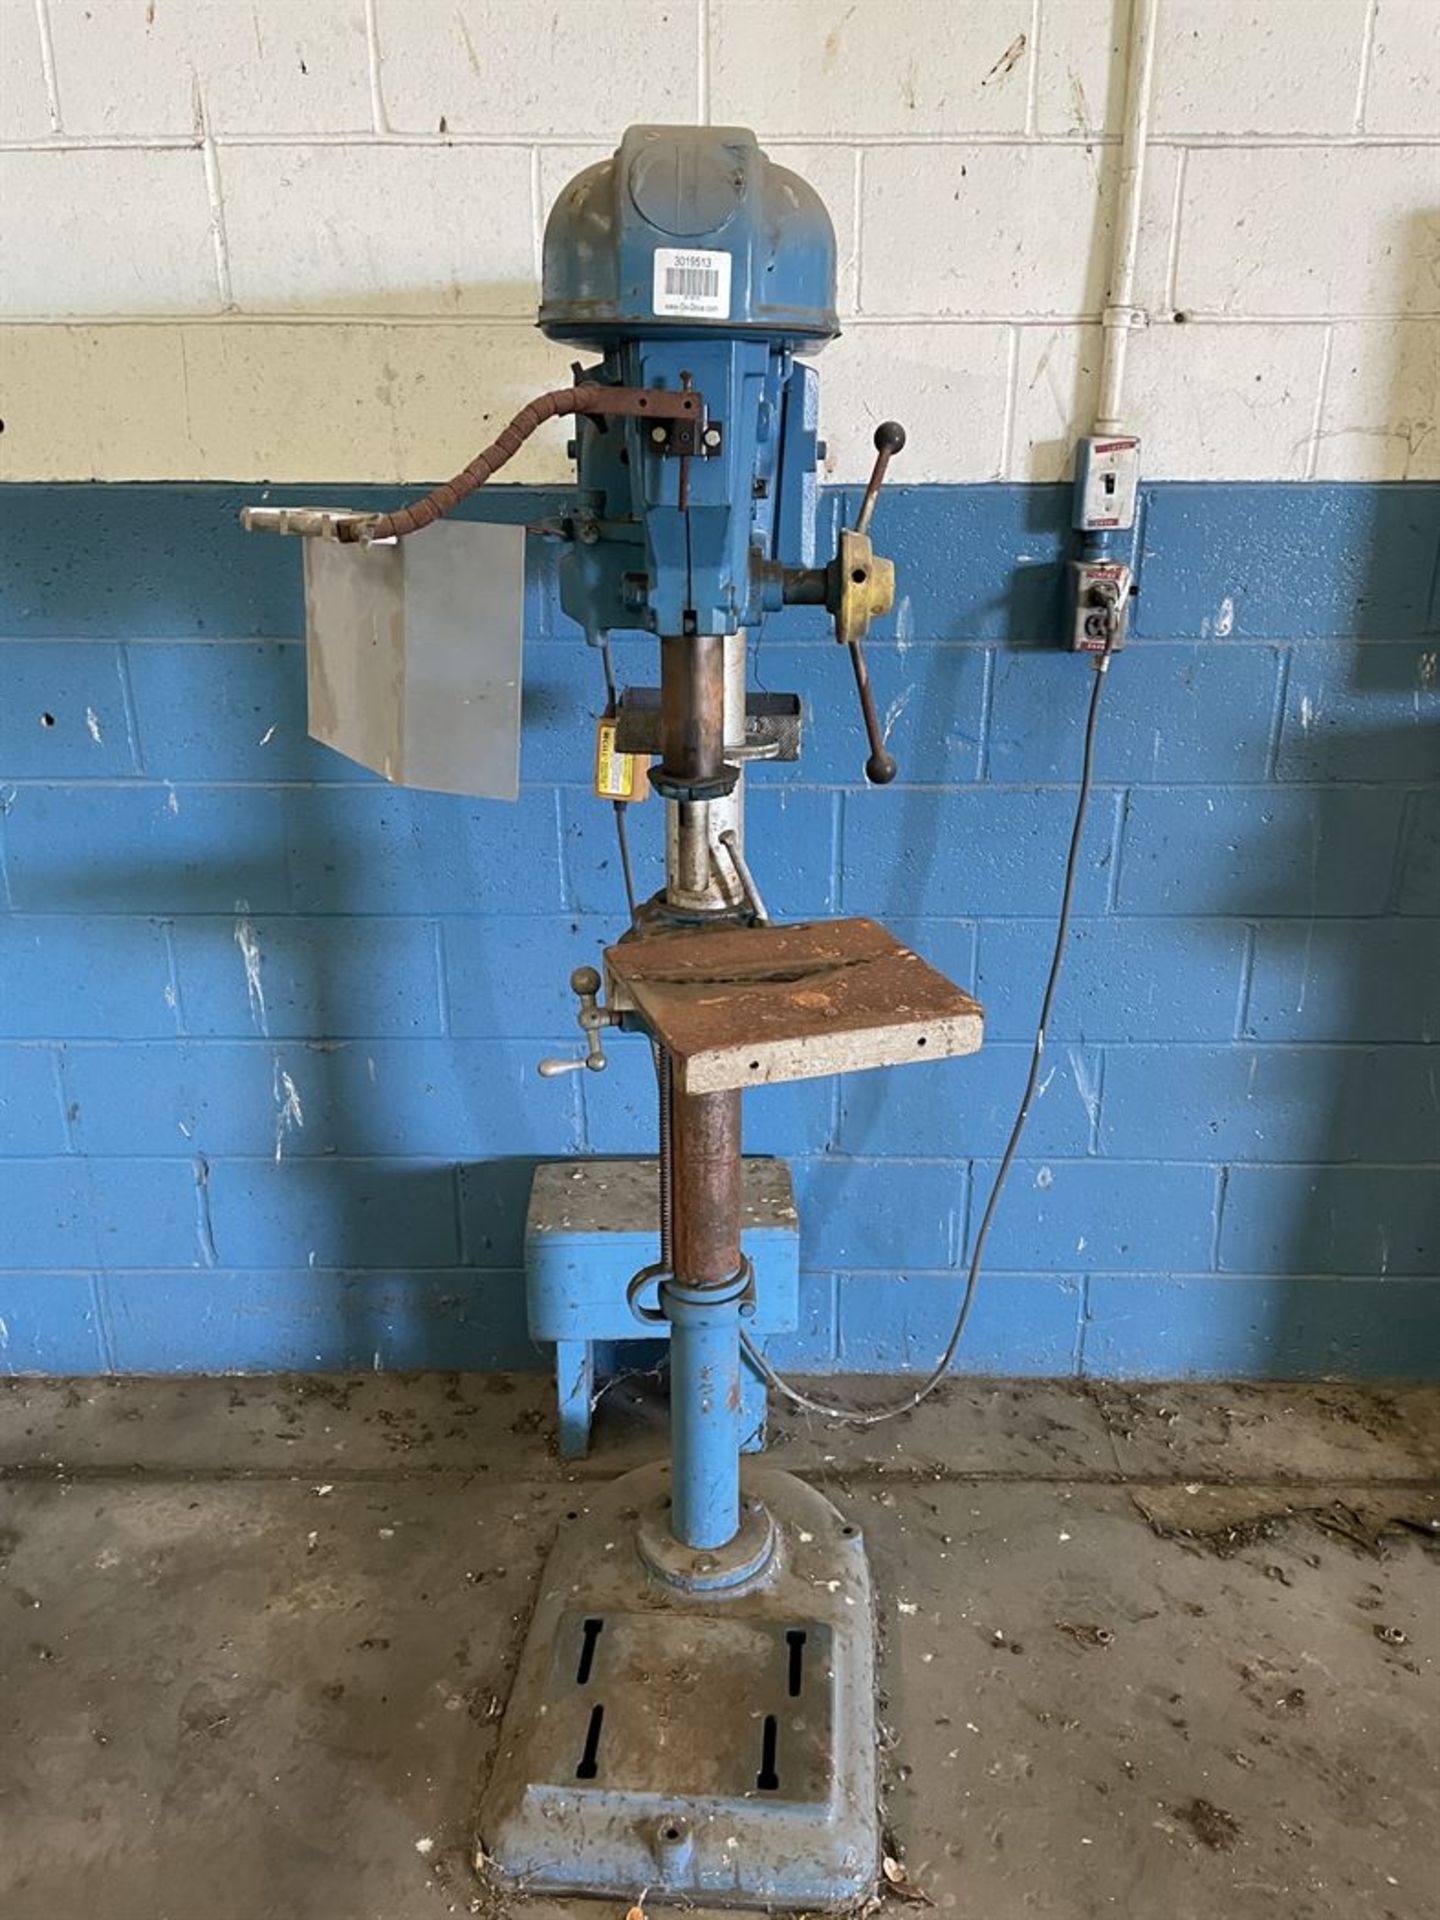 ROCKWELL 17-600 Drill Press, s/n 1342796, 3/4 HP Motor (Condition Unknown) - Image 2 of 4